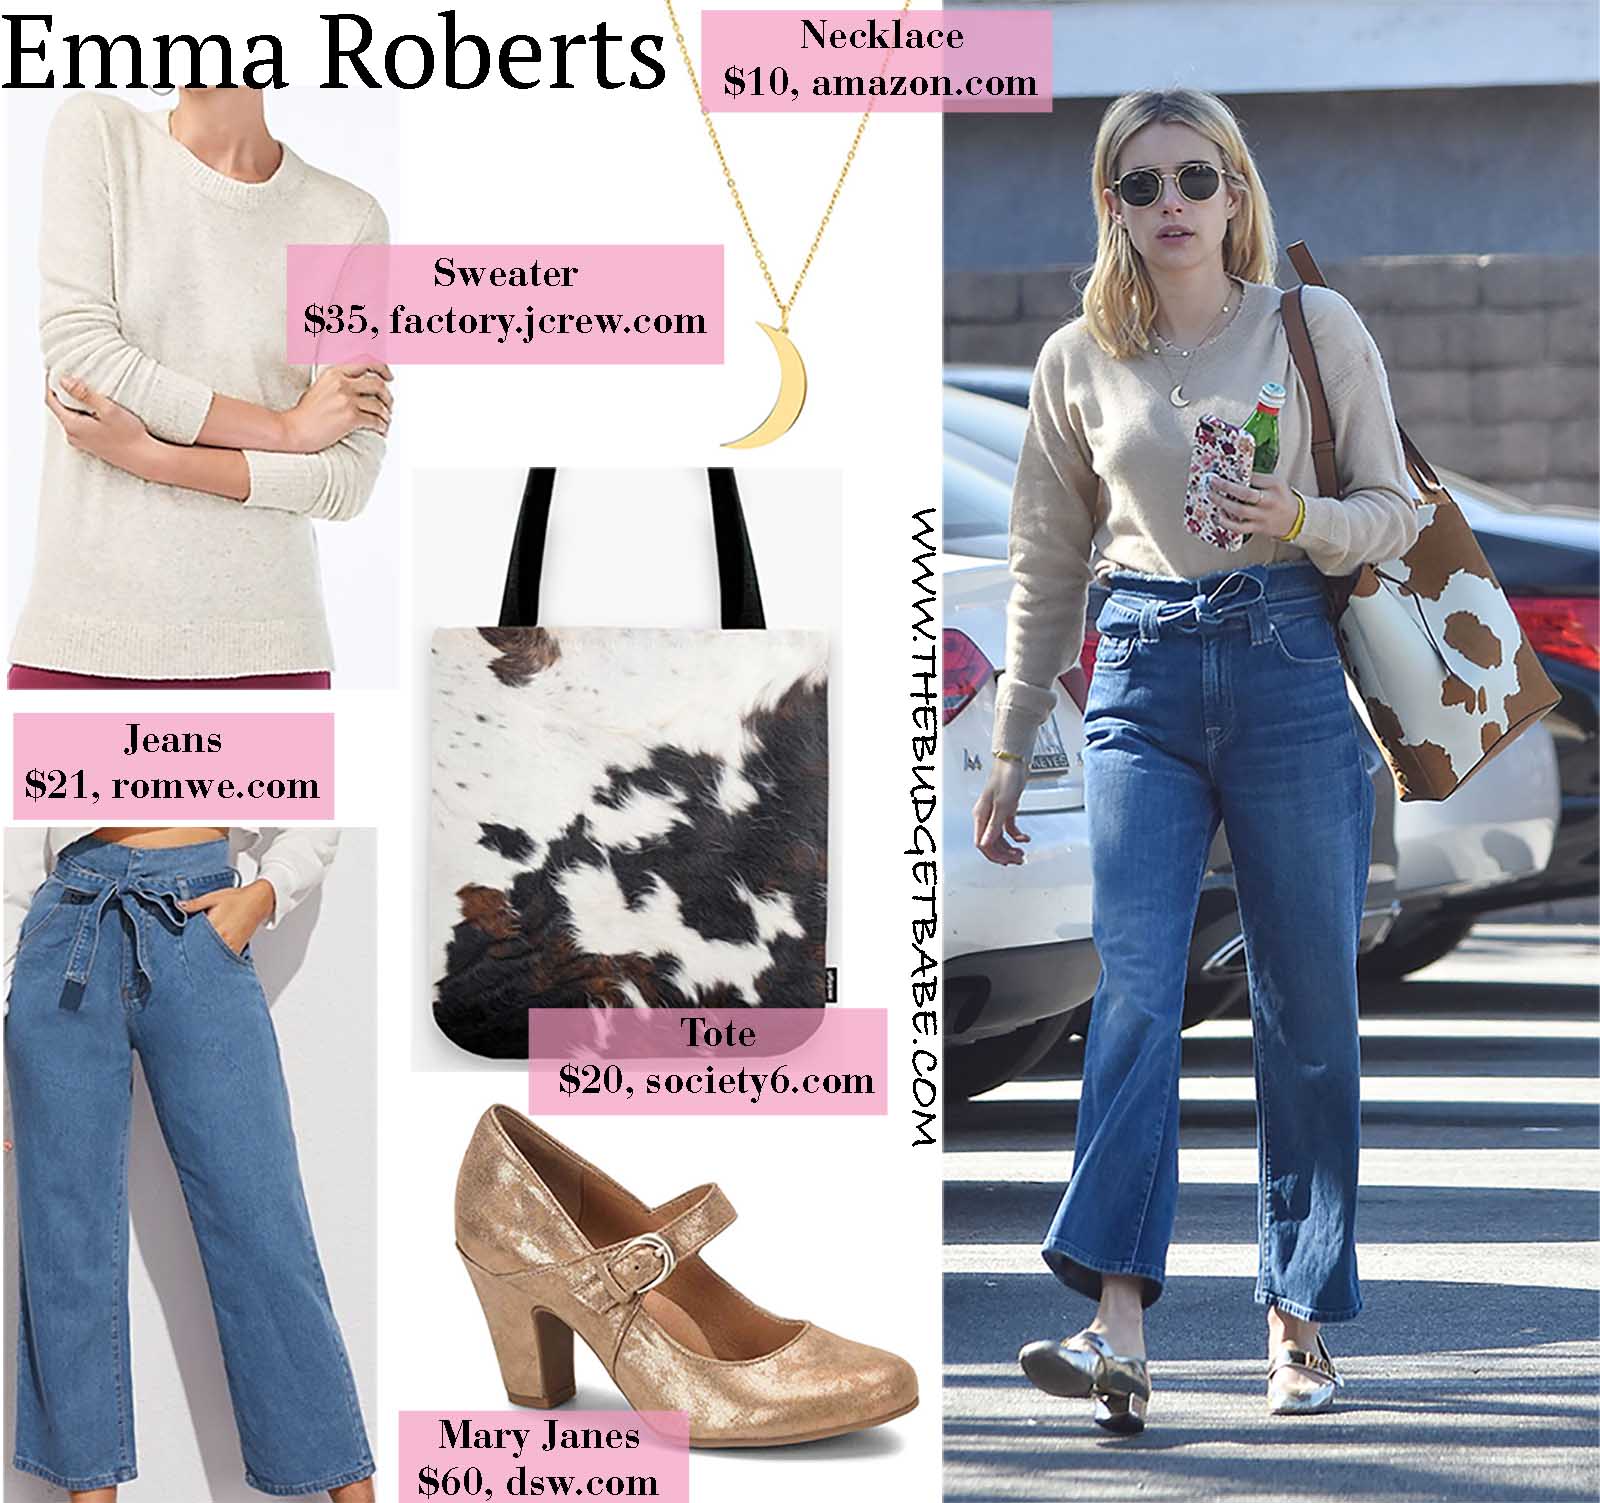 Emma wears the perfect transitional Spring outfit!